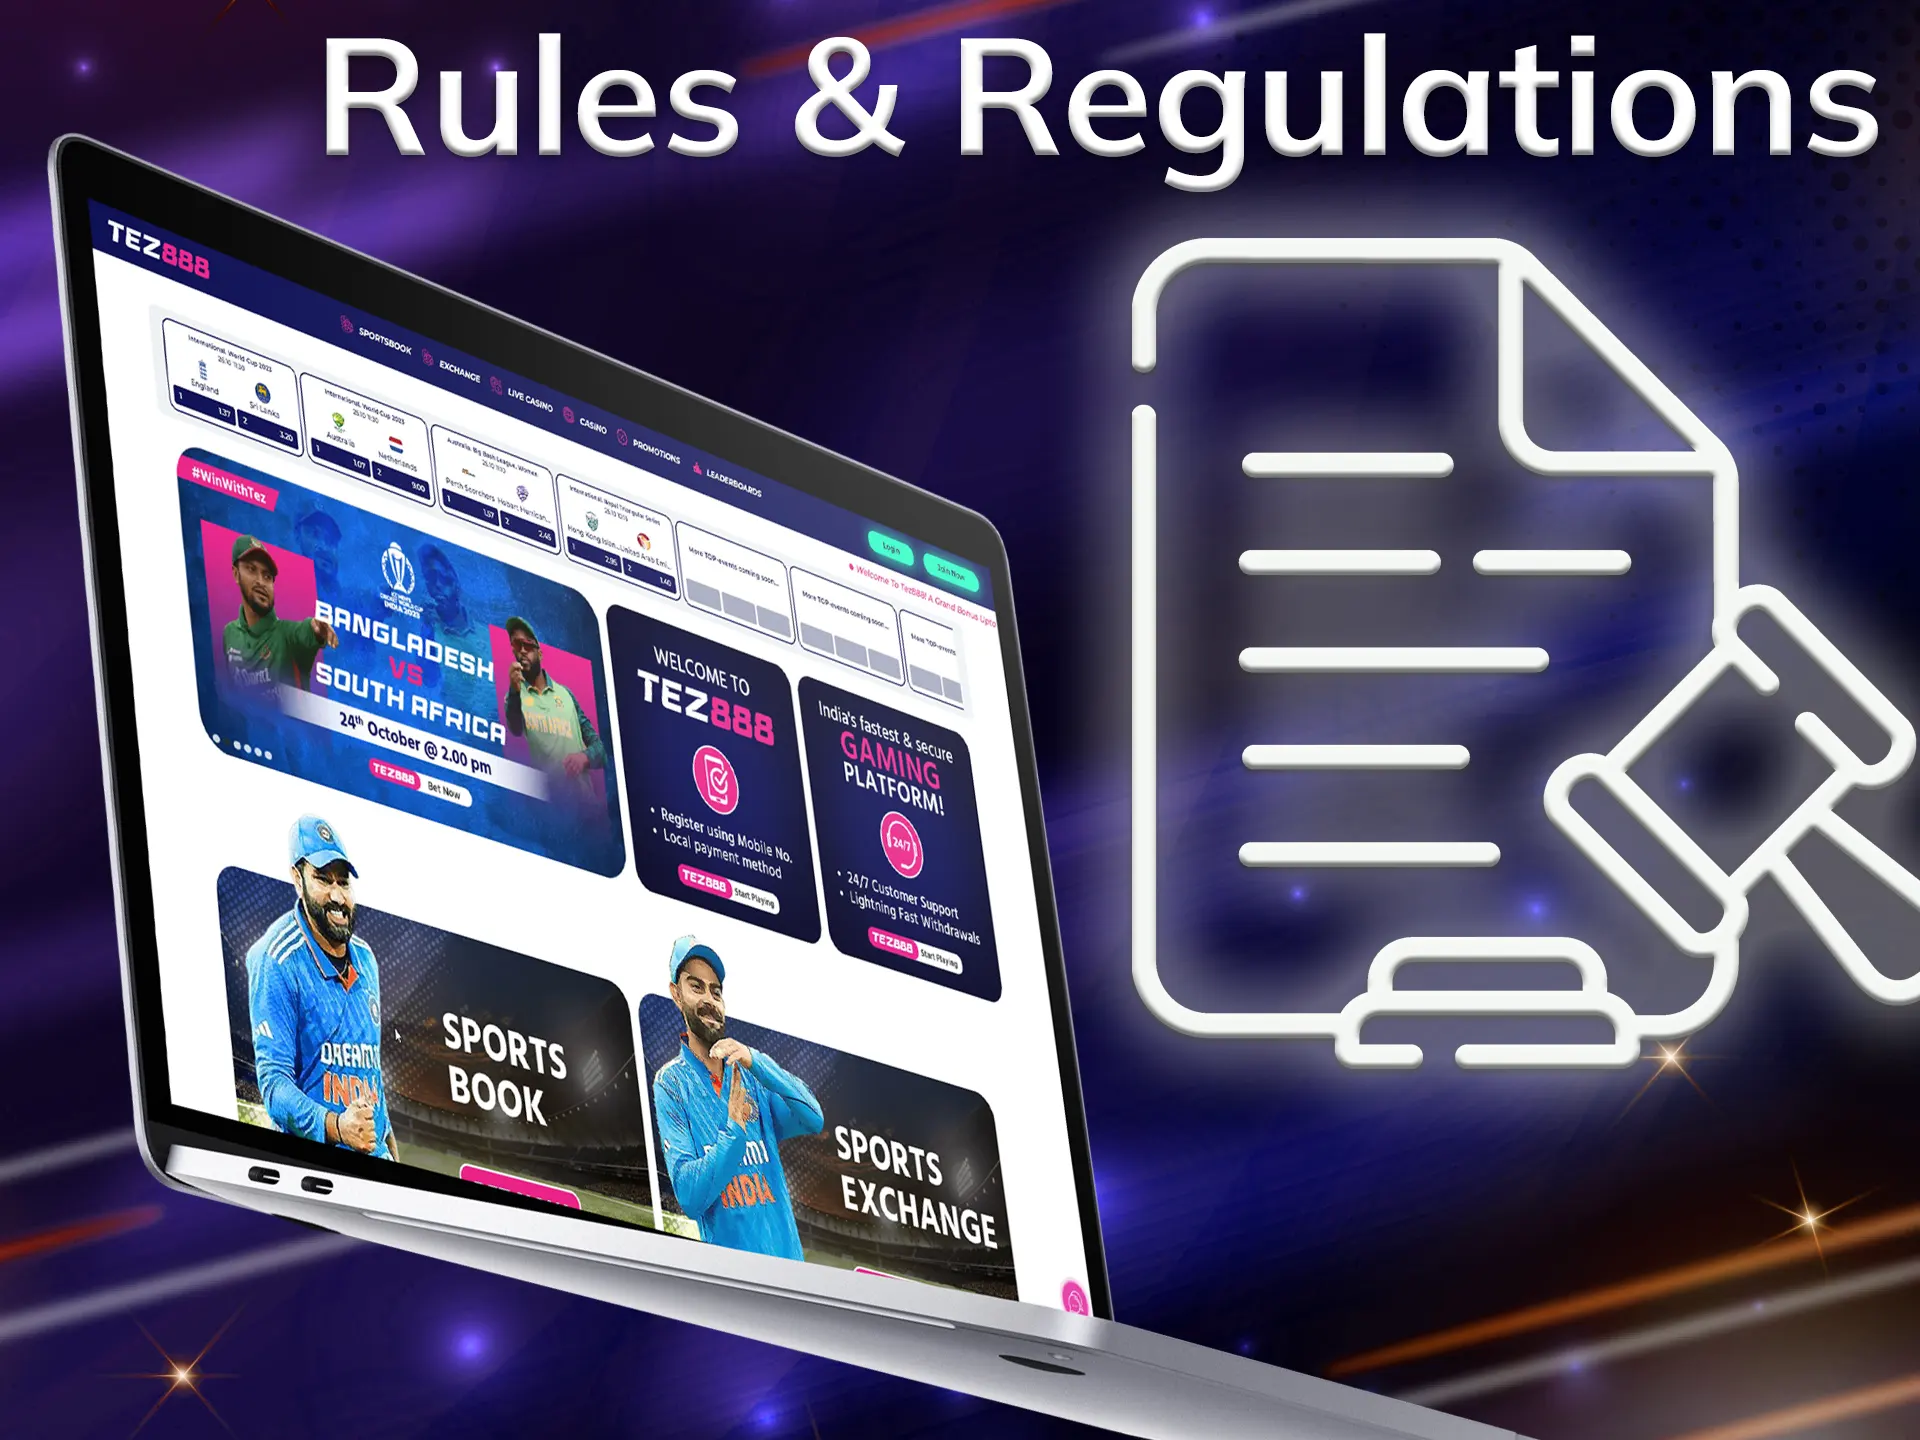 Familiarise yourself with the rules and regulations to be followed on tez888.